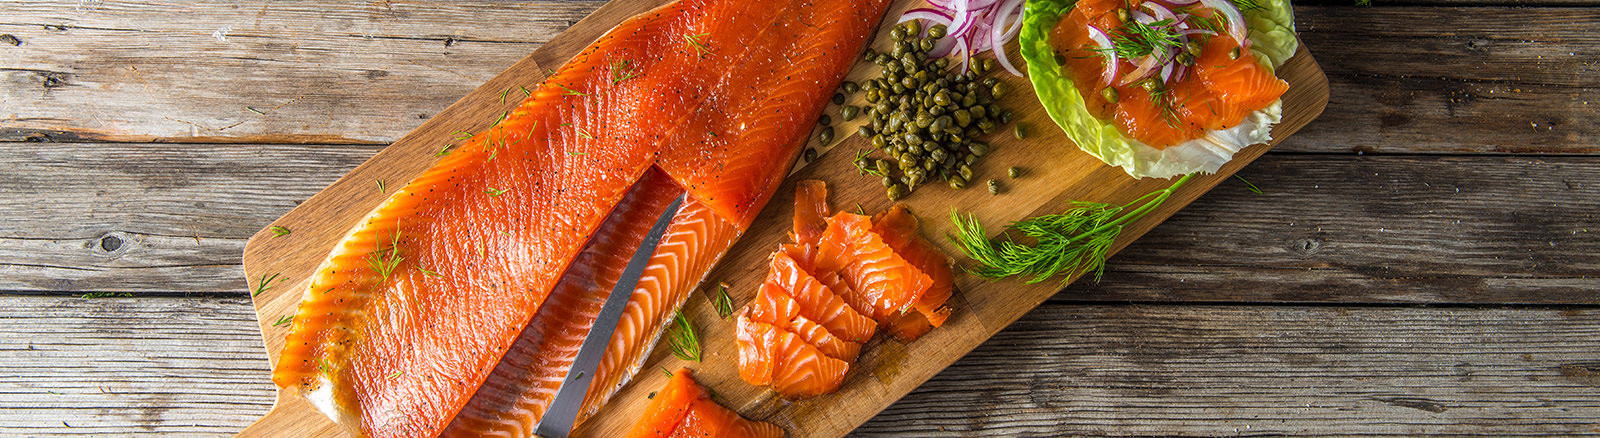 Traeger Smoked Salmon Recipes
 Traeger Wood Fire Grill Recipe Cold Smoked Salmon